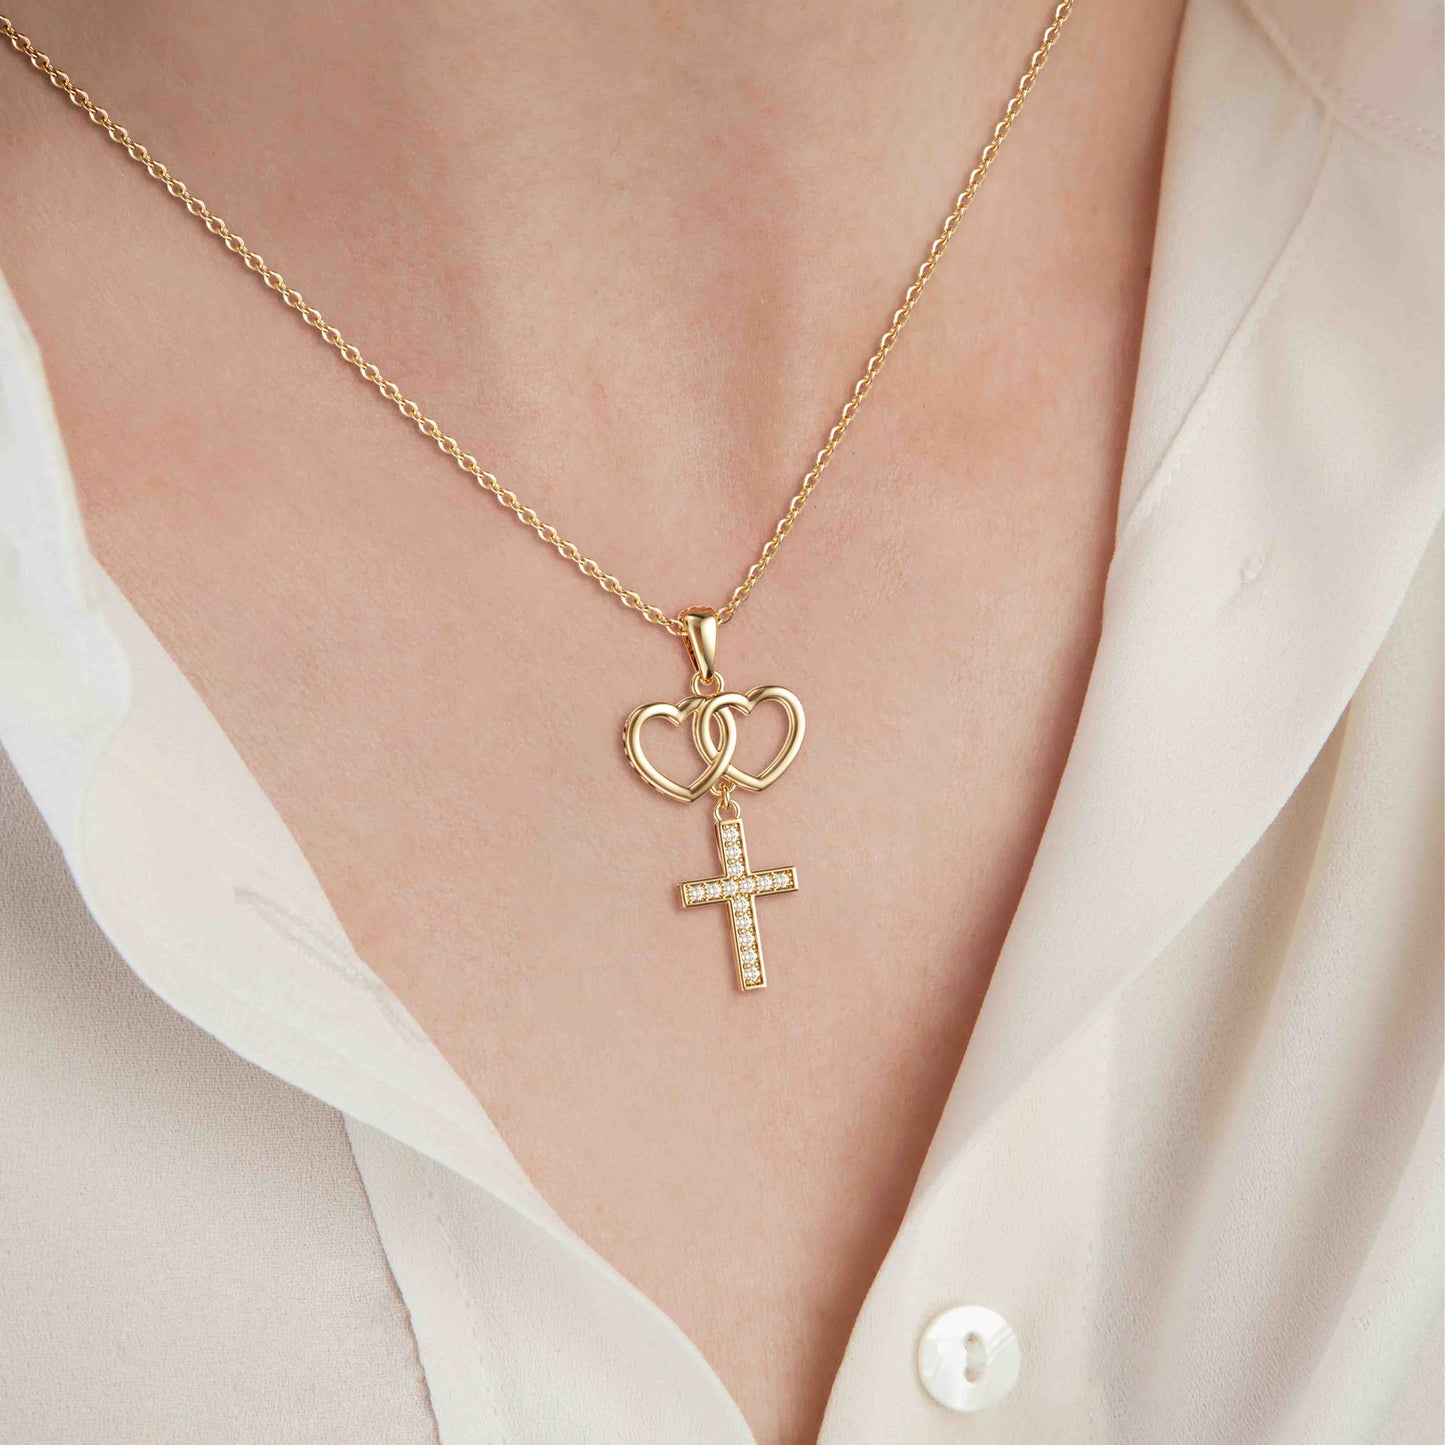 Gold Love And Faith Cross Necklace